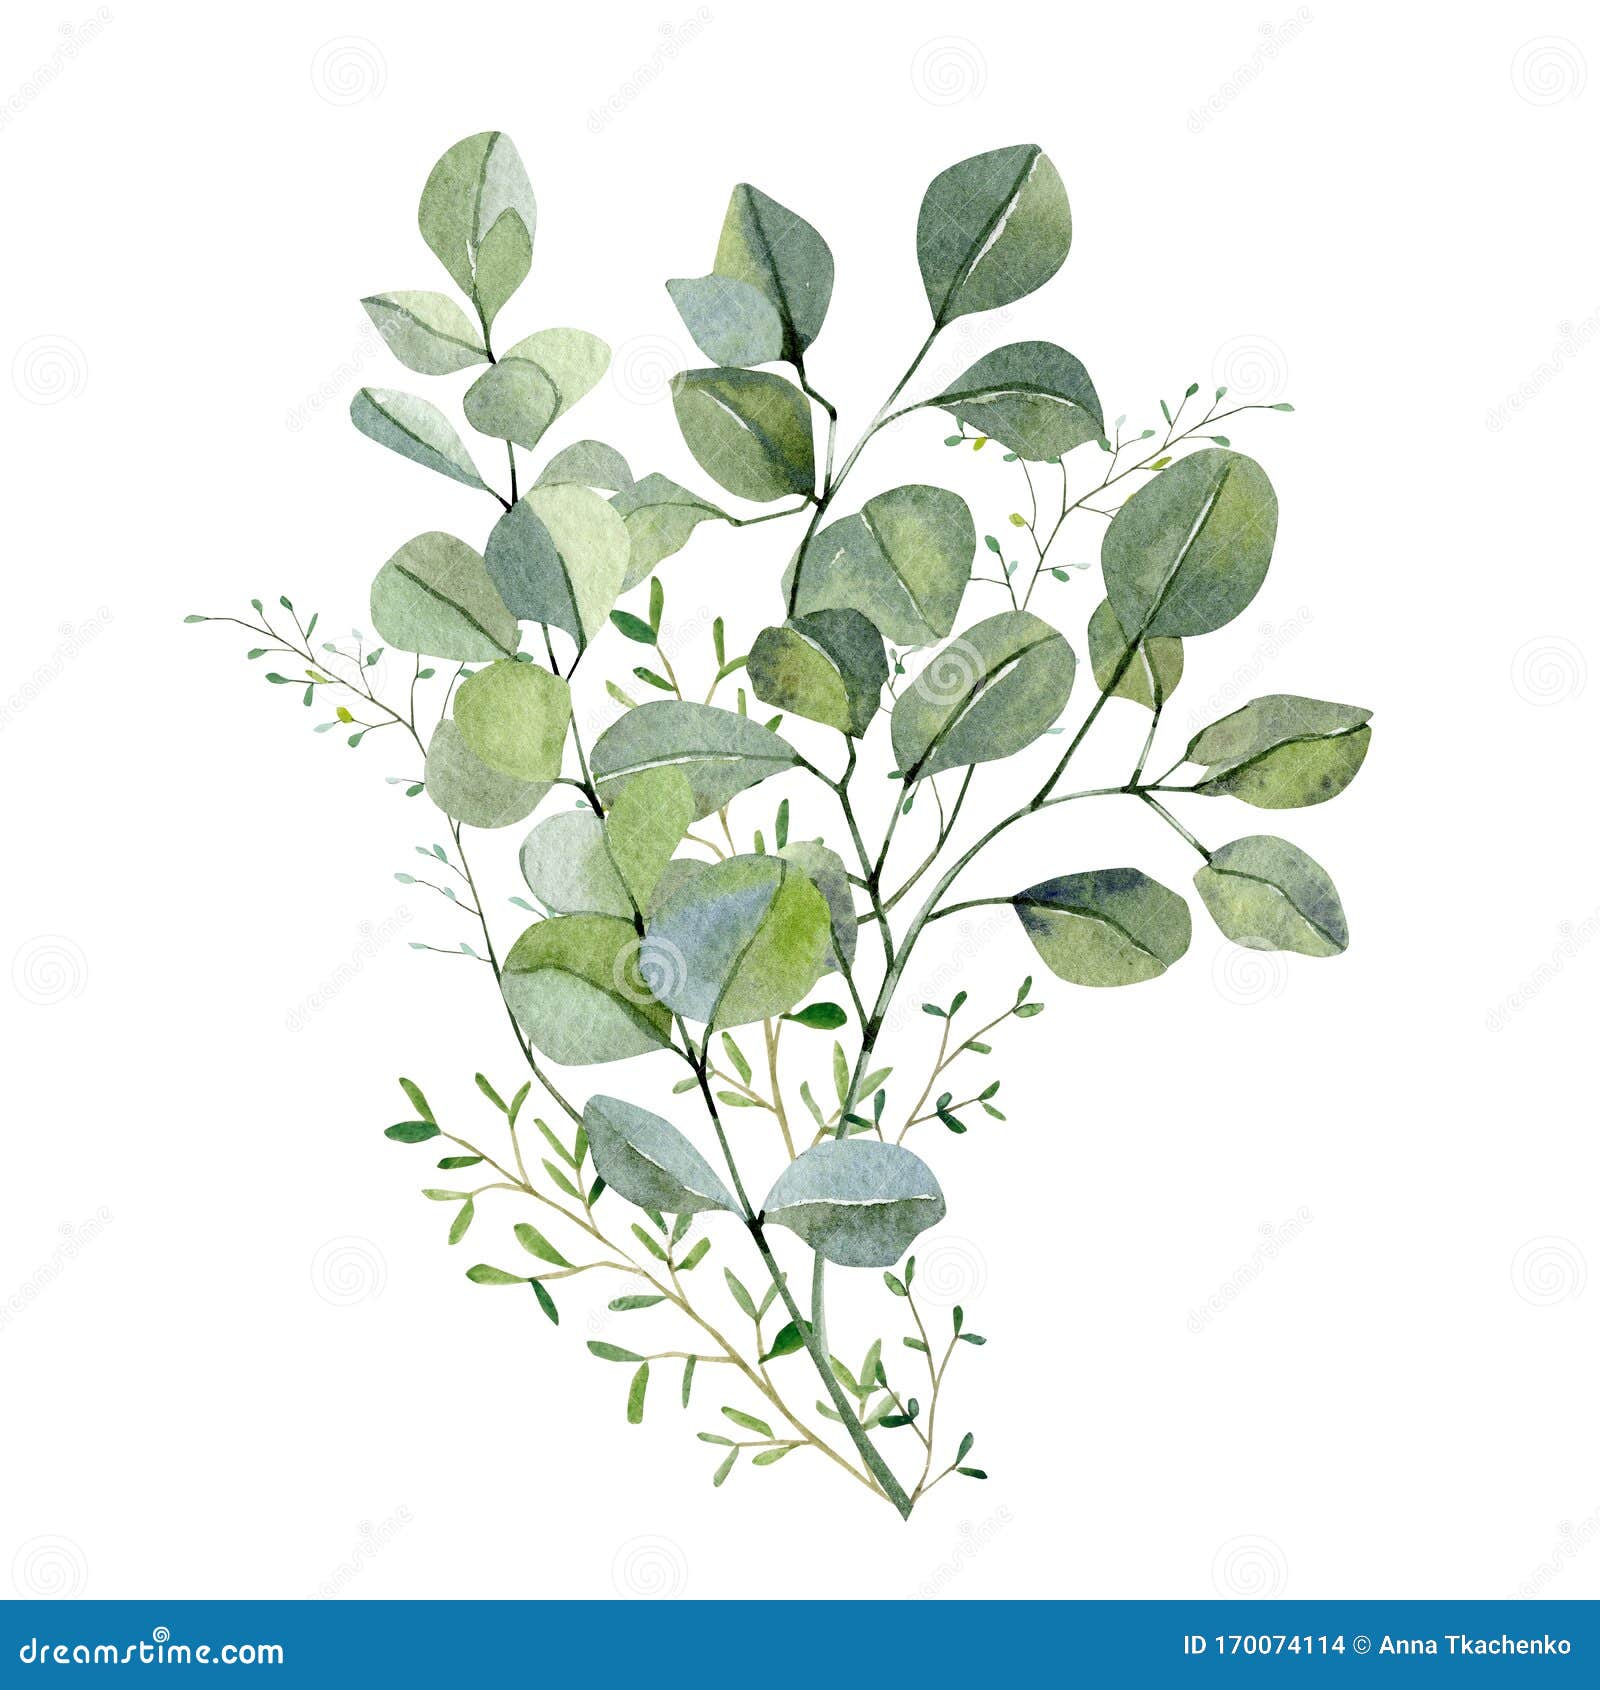 watercolor hand painted bouquet silver dollar eucalyptus and green plants. frolar branches and leaves  on white background